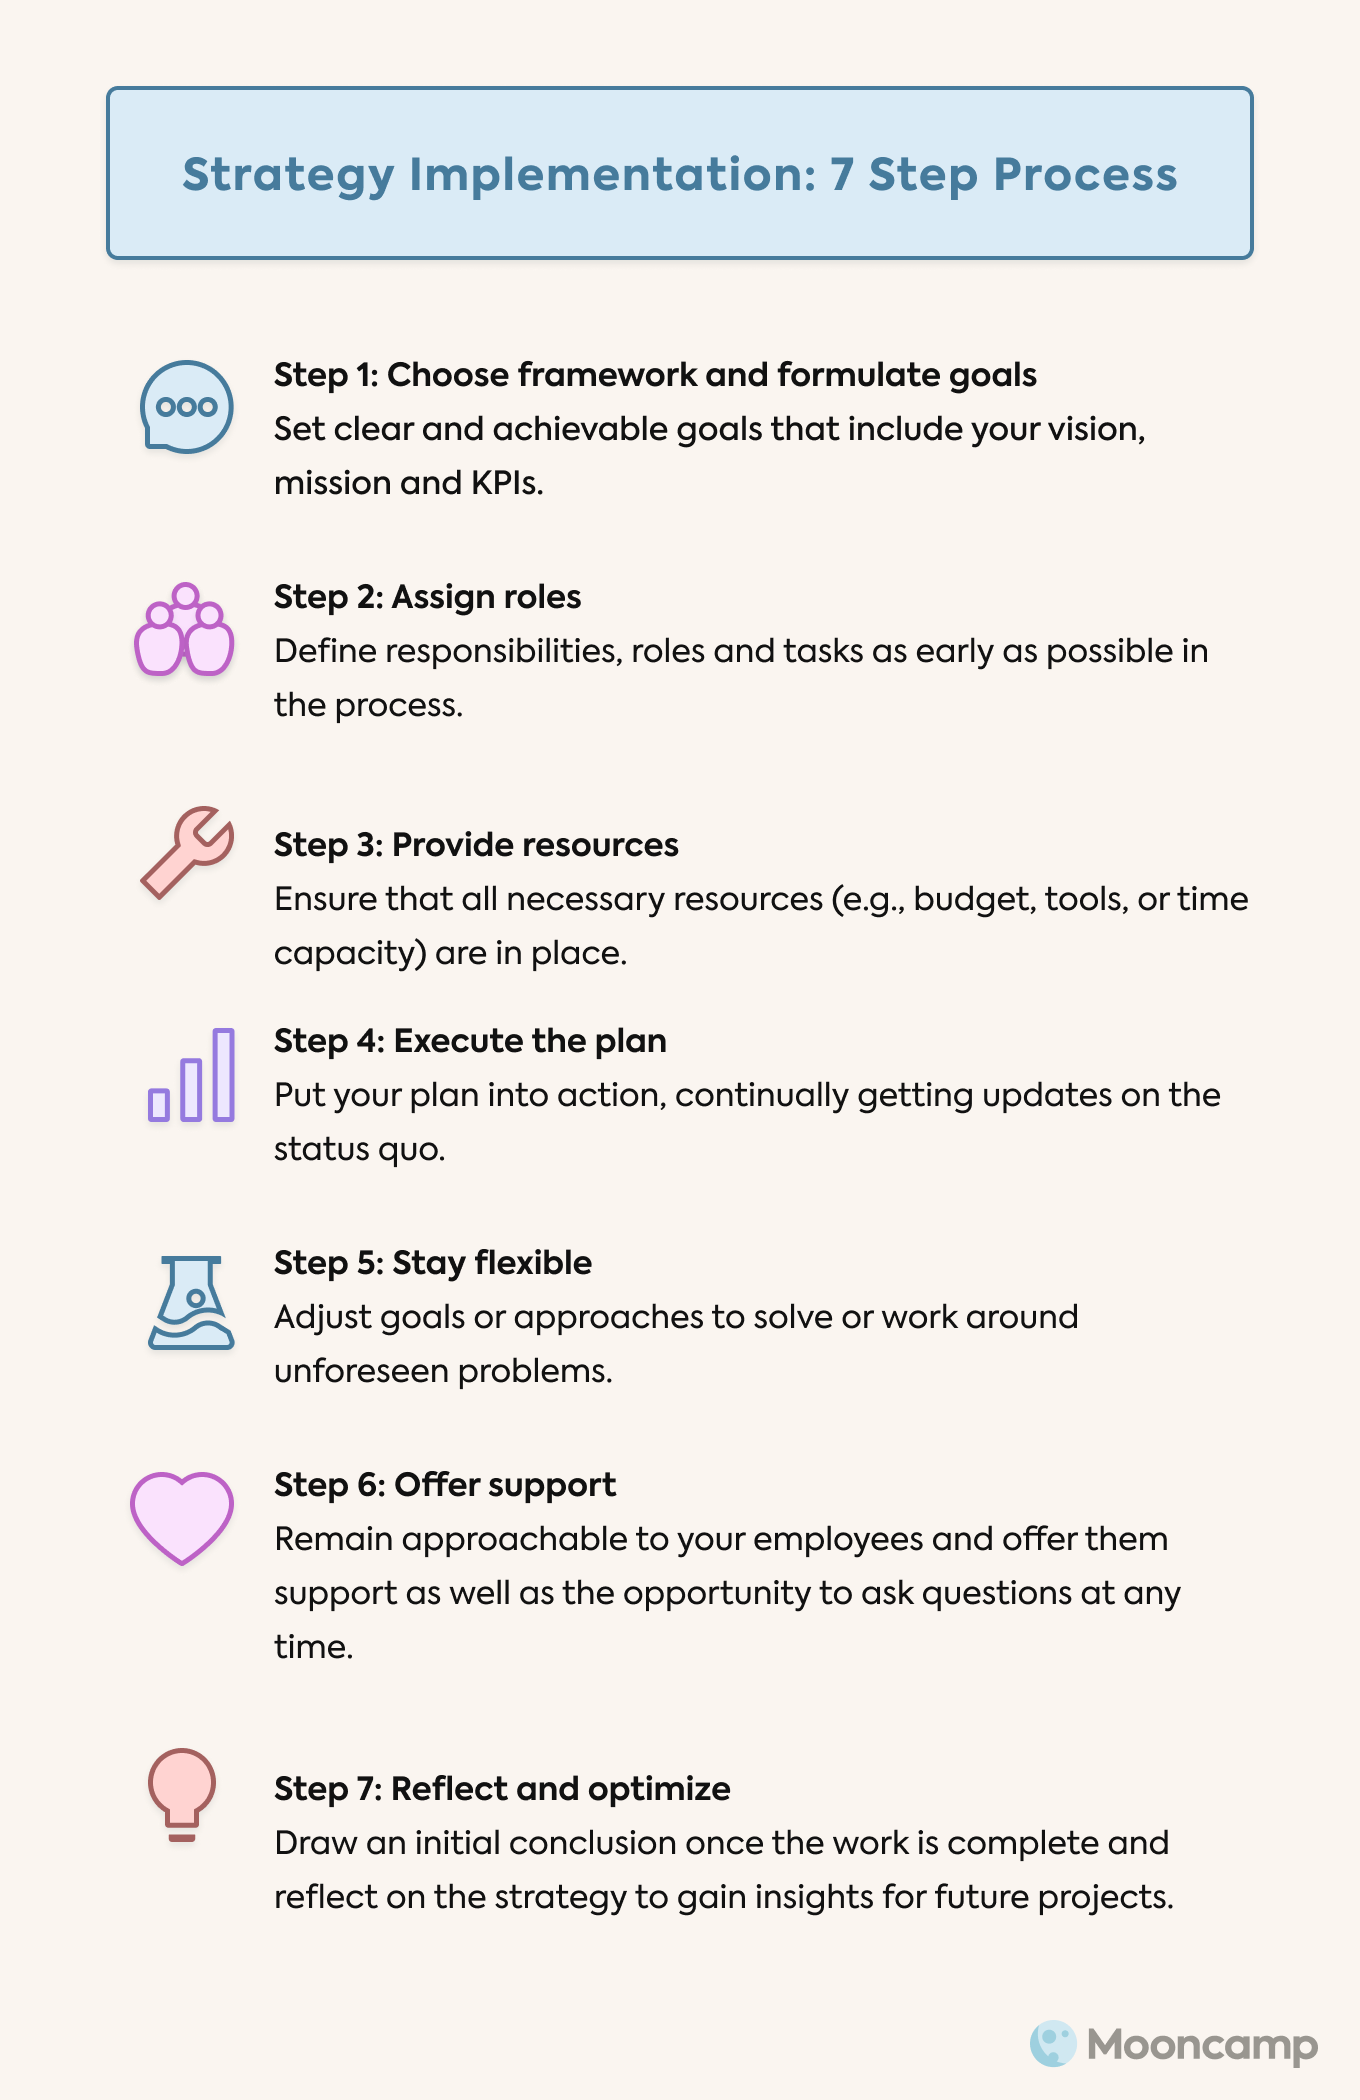 Strategy Execution: 7 Step Process